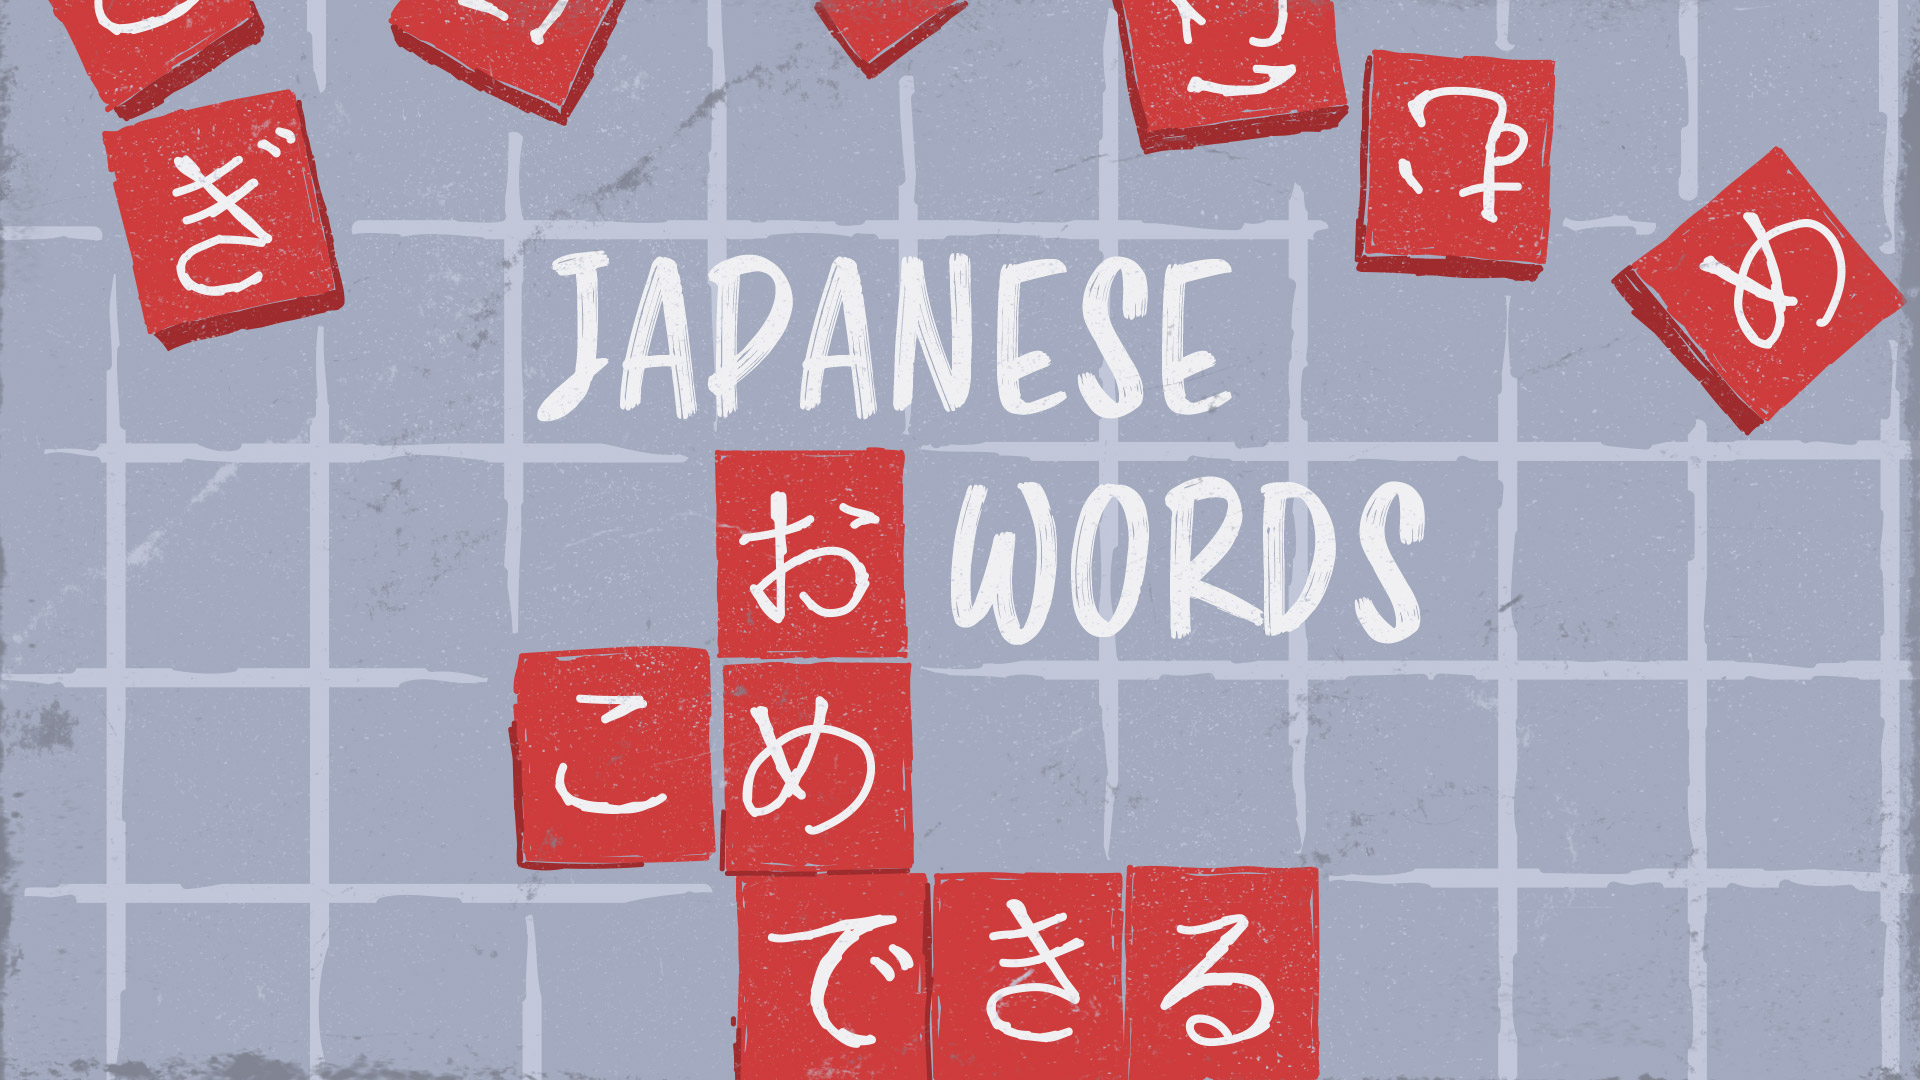 japanese words and meanings